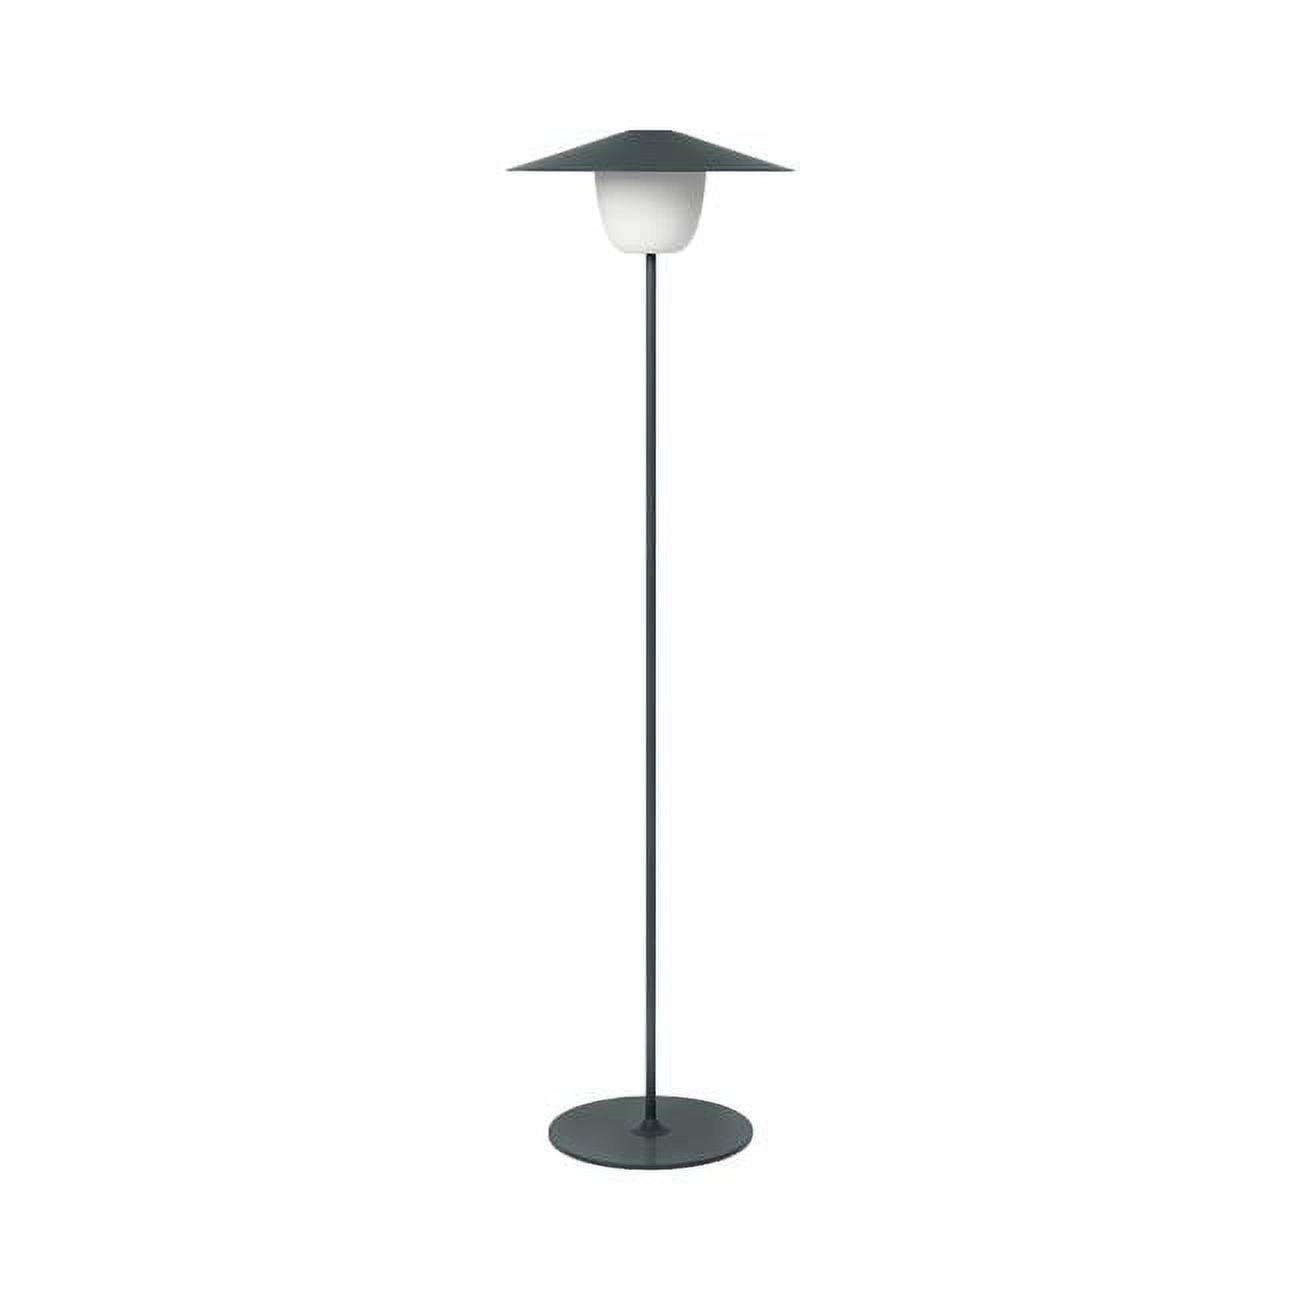 Picture of Blomus 66073 120 x 34 cm Ani Mobile LED Floor Lamp, Magnet - Large